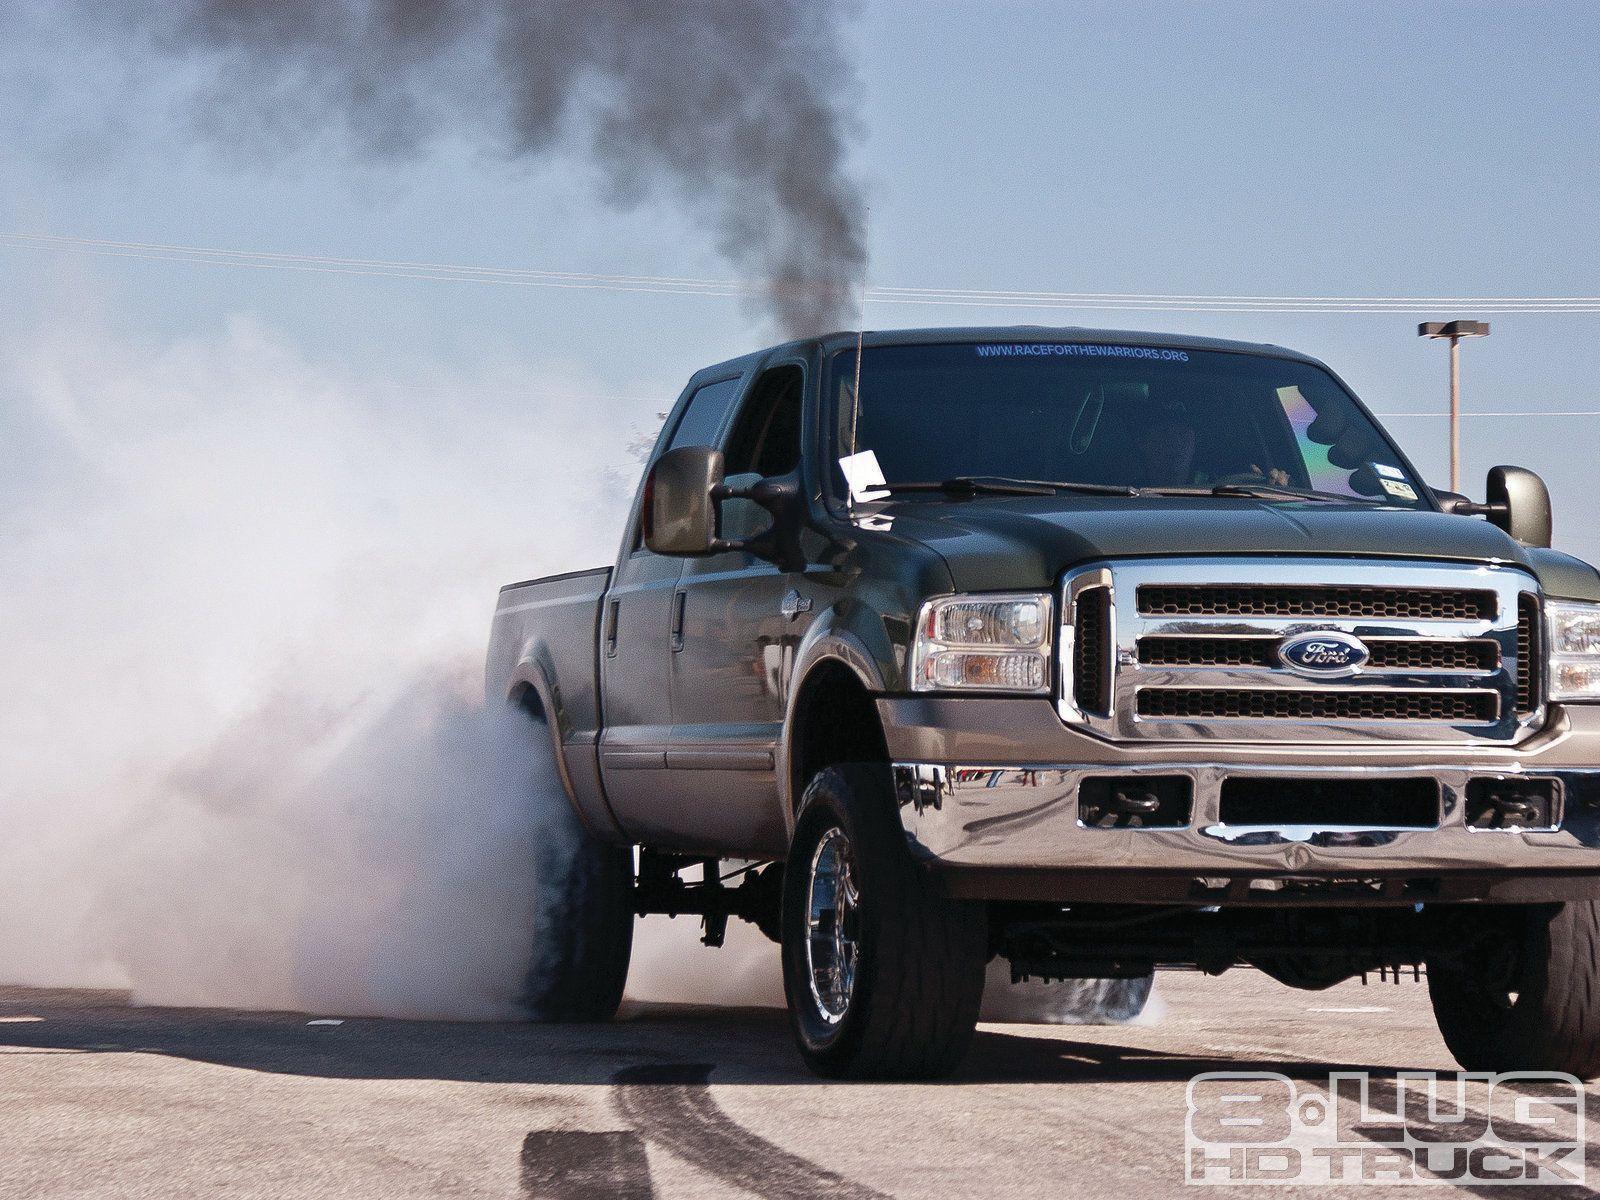 lifted ford powerstroke wallpaper